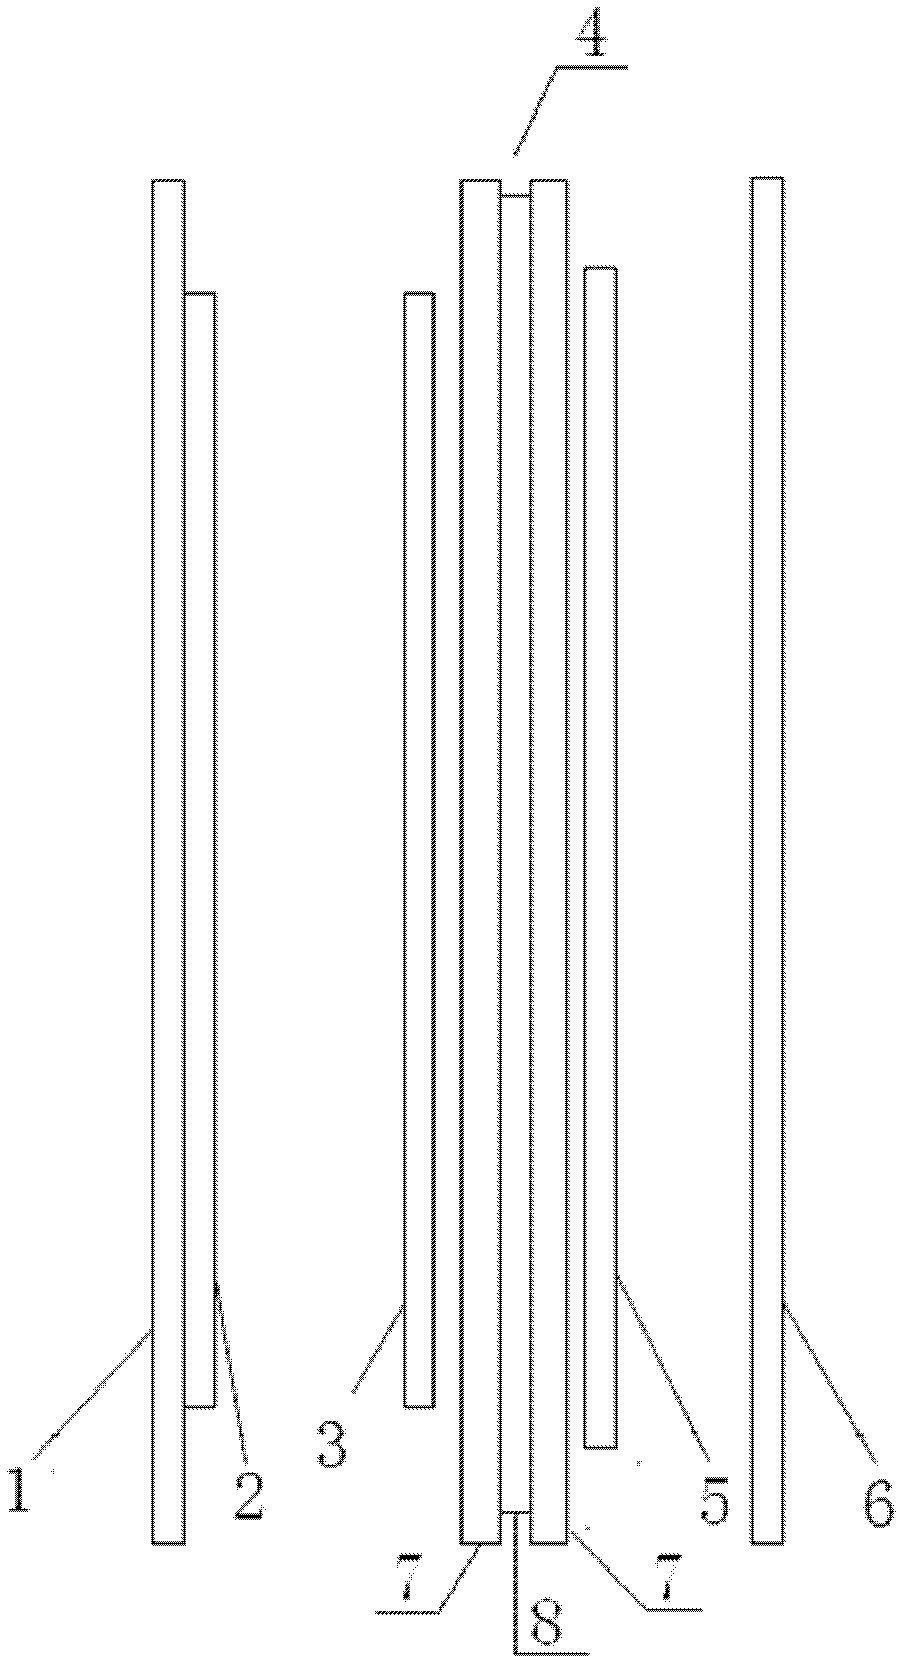 Superbright high-definition protective film with self luminescence under sunlight or ultraviolet light and manufacturing method thereof